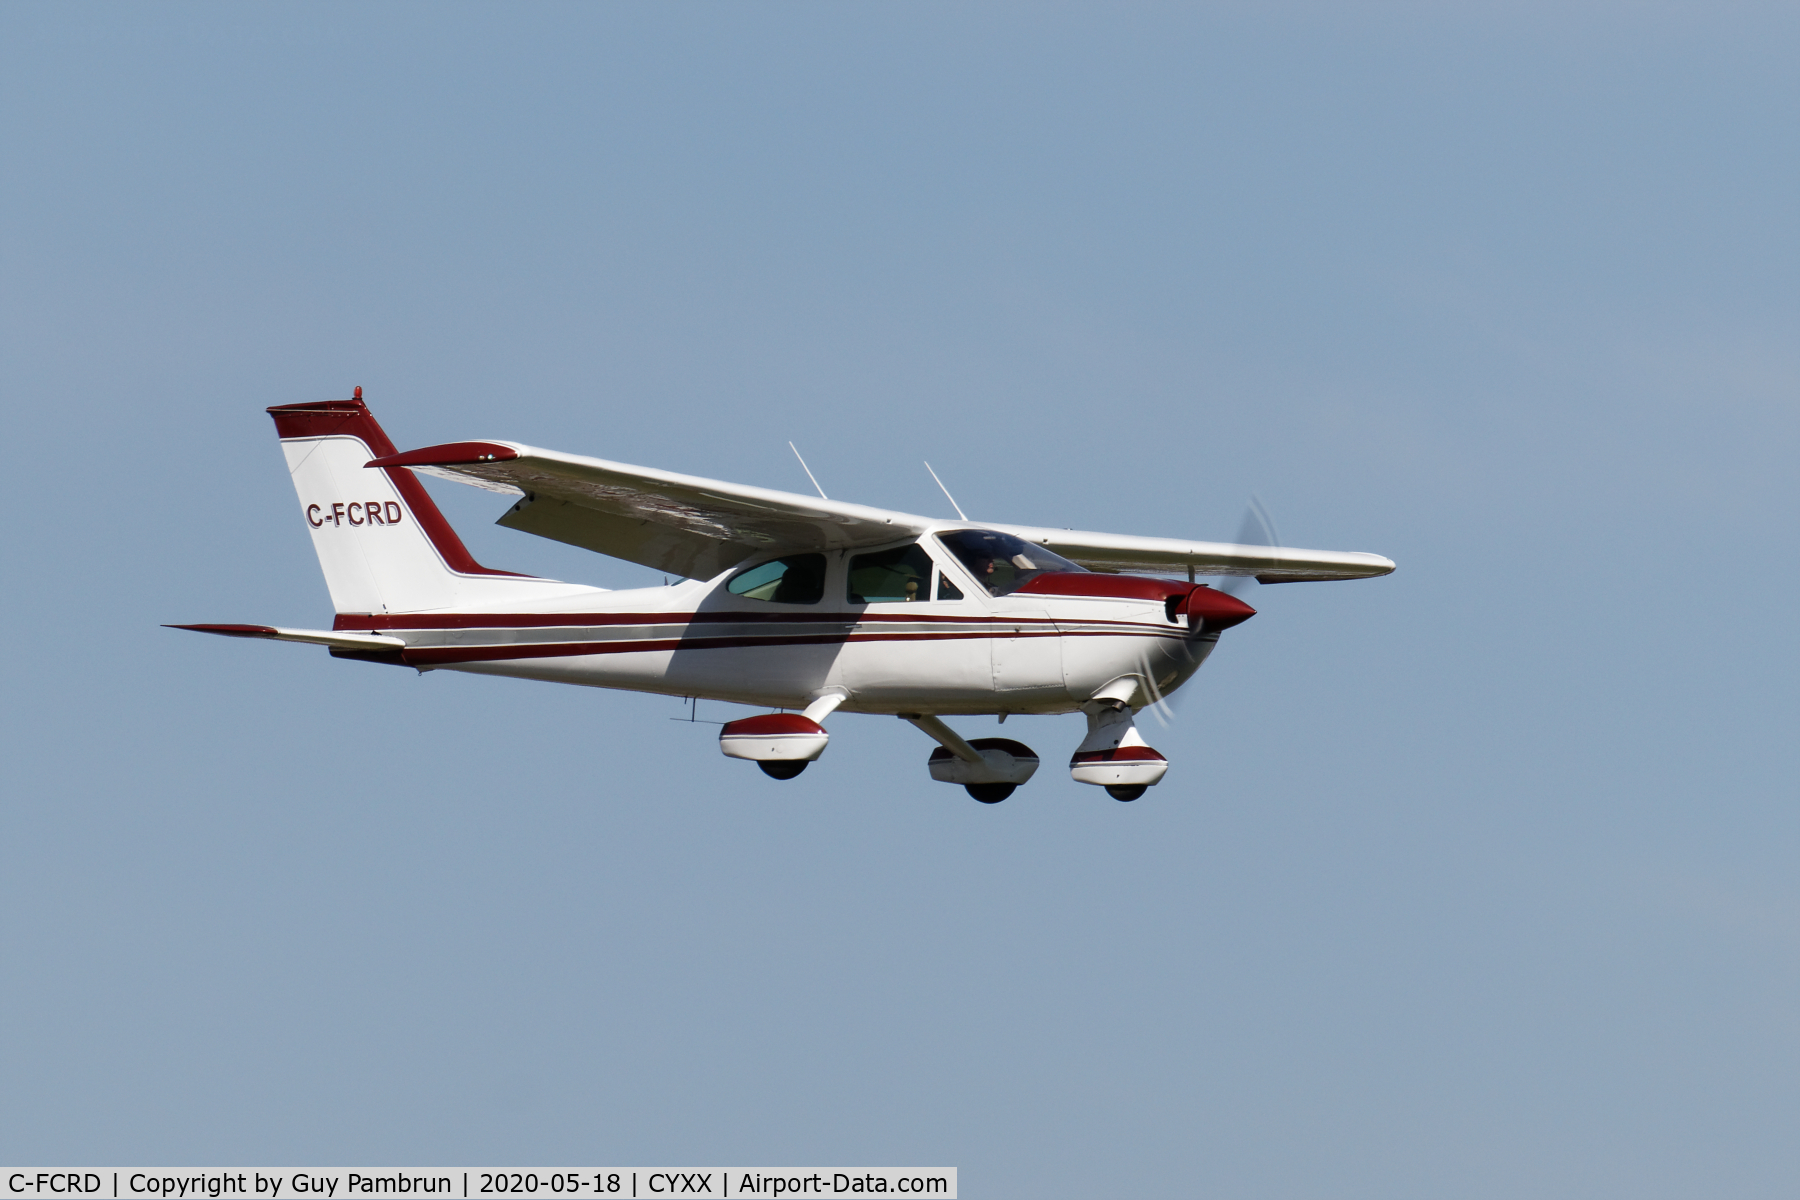 C-FCRD, 1974 Cessna 177B Cardinal C/N 17702099, Landing on 19 for pilot briefing and departure to take part in 